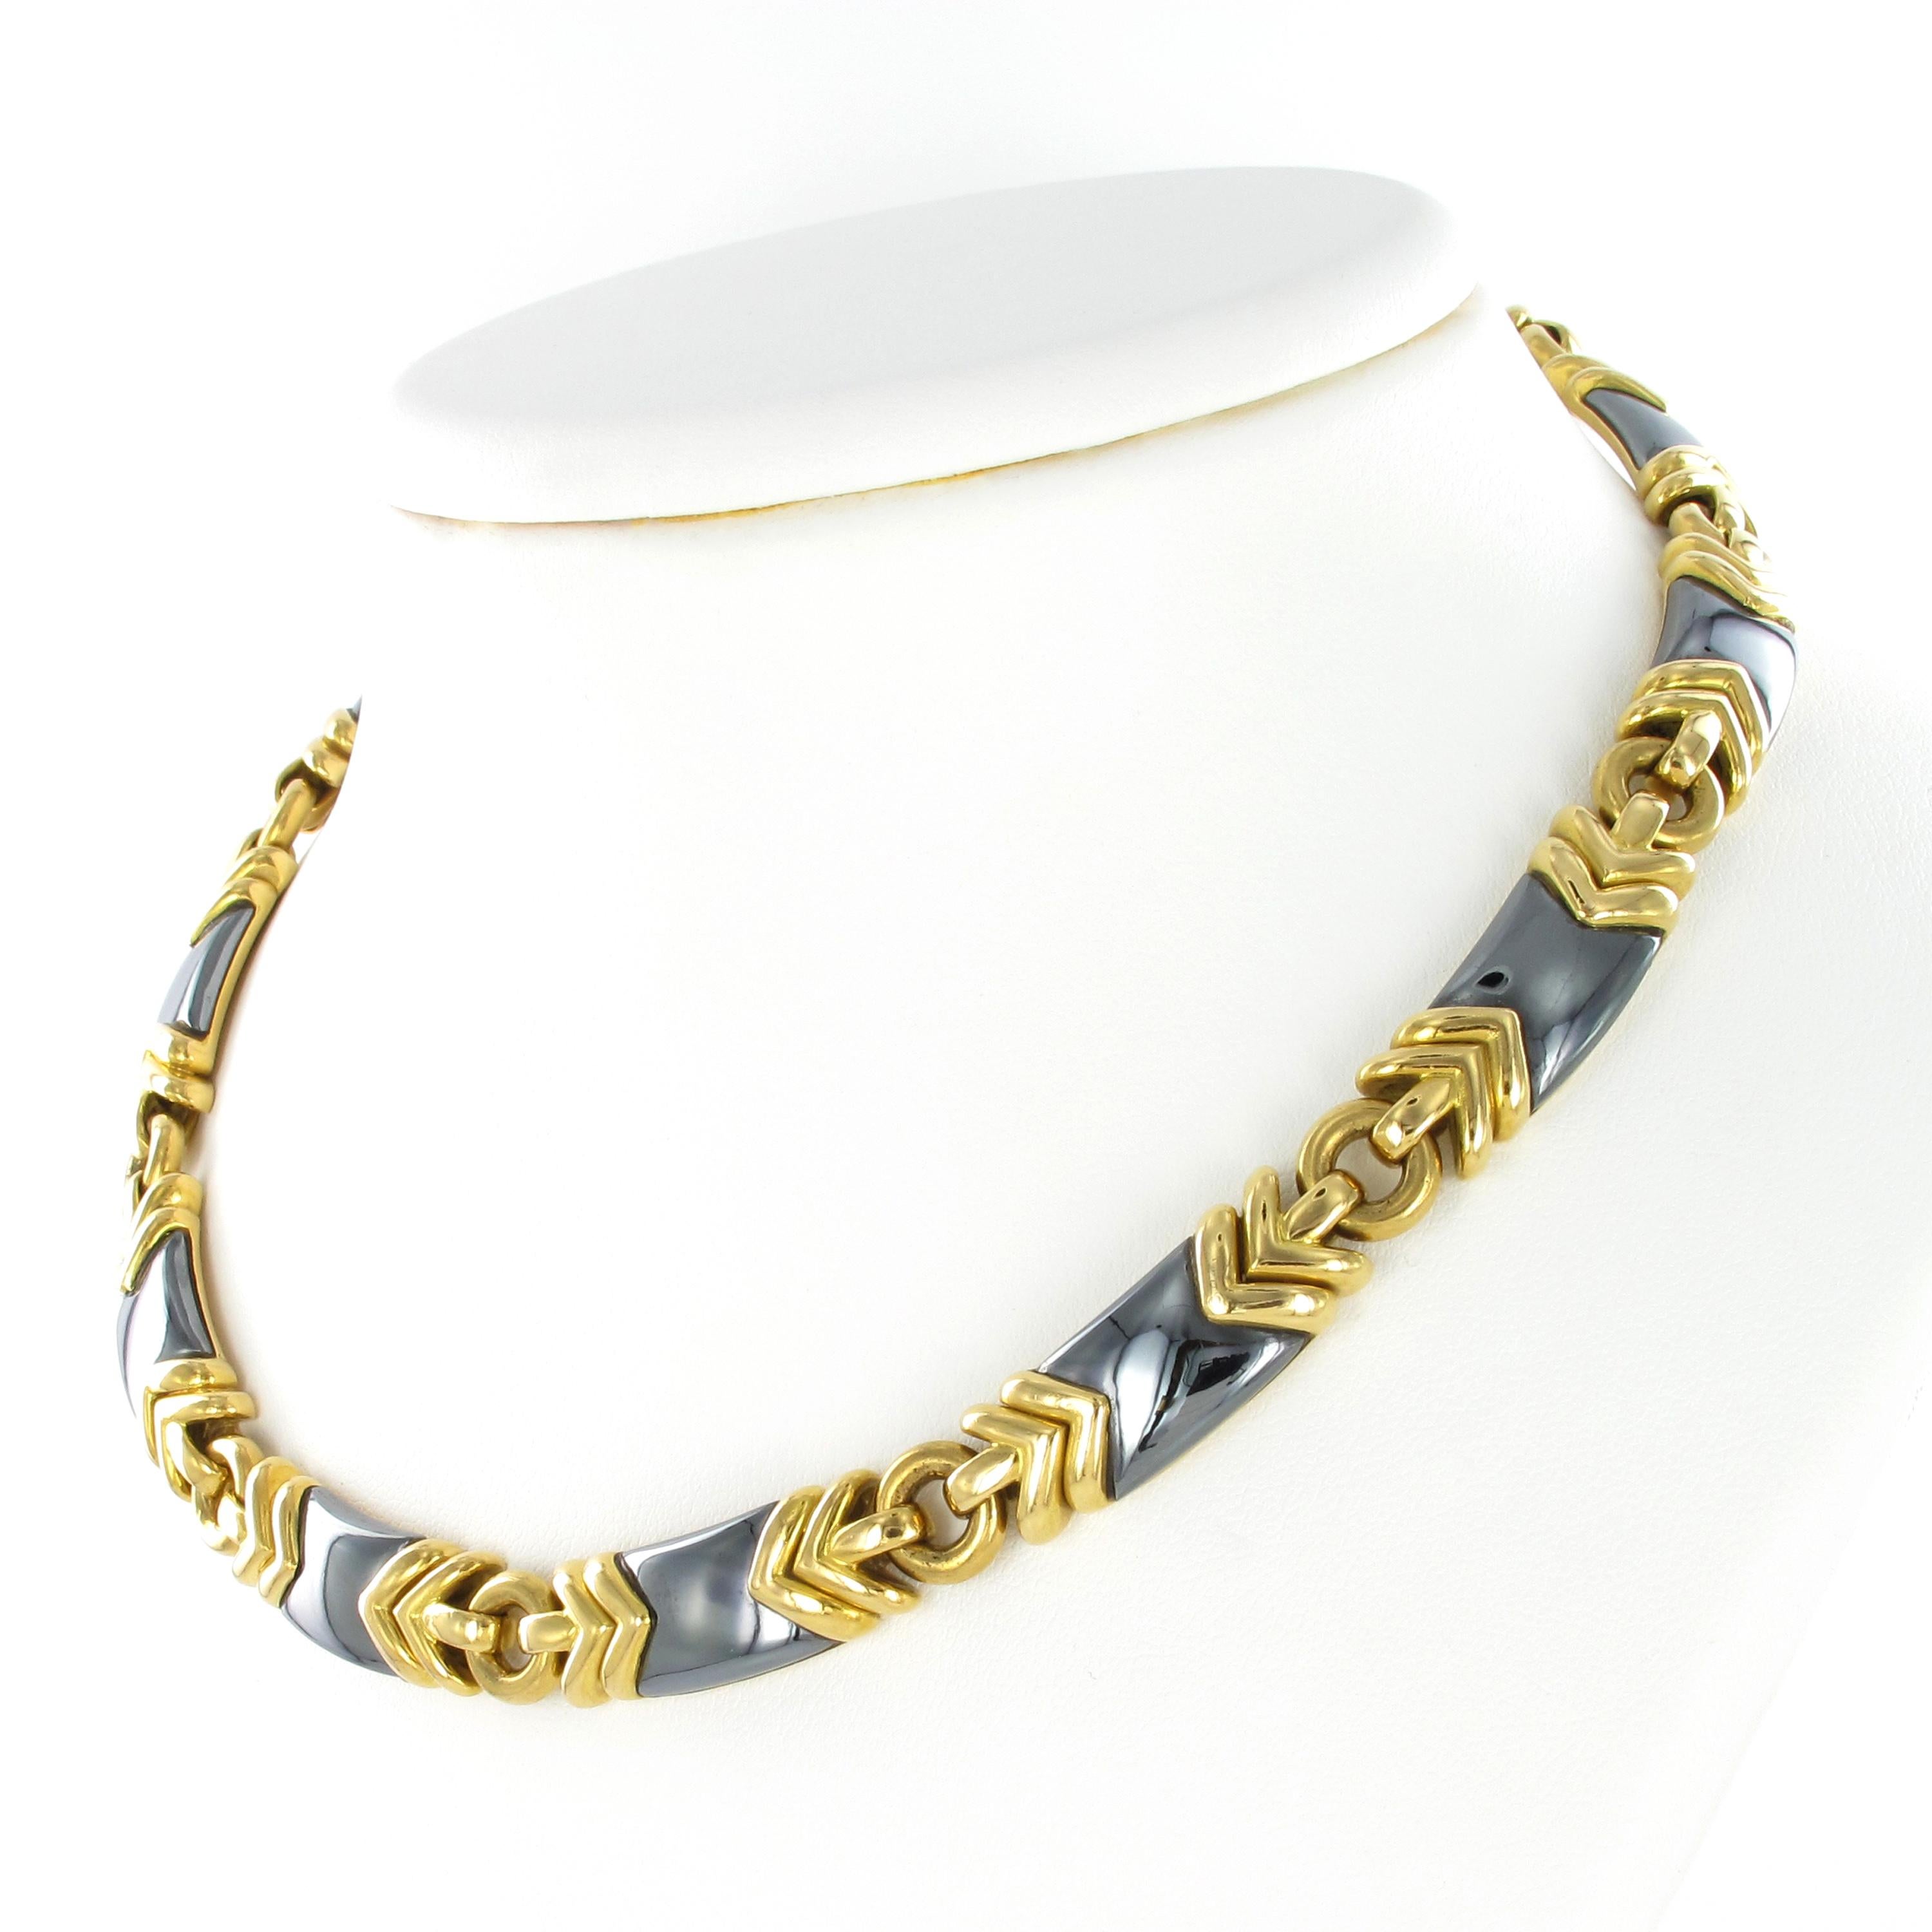 Timeless necklace from Bulgari. Alternating elements in Hematite and 18 Karat yellow gold.
Made in Italy, circa 1980s. FYI: we have matching bracelet, earstuds and ring on stock.

btw: we have matching bracelet, earstuds and ring on stock

Signed